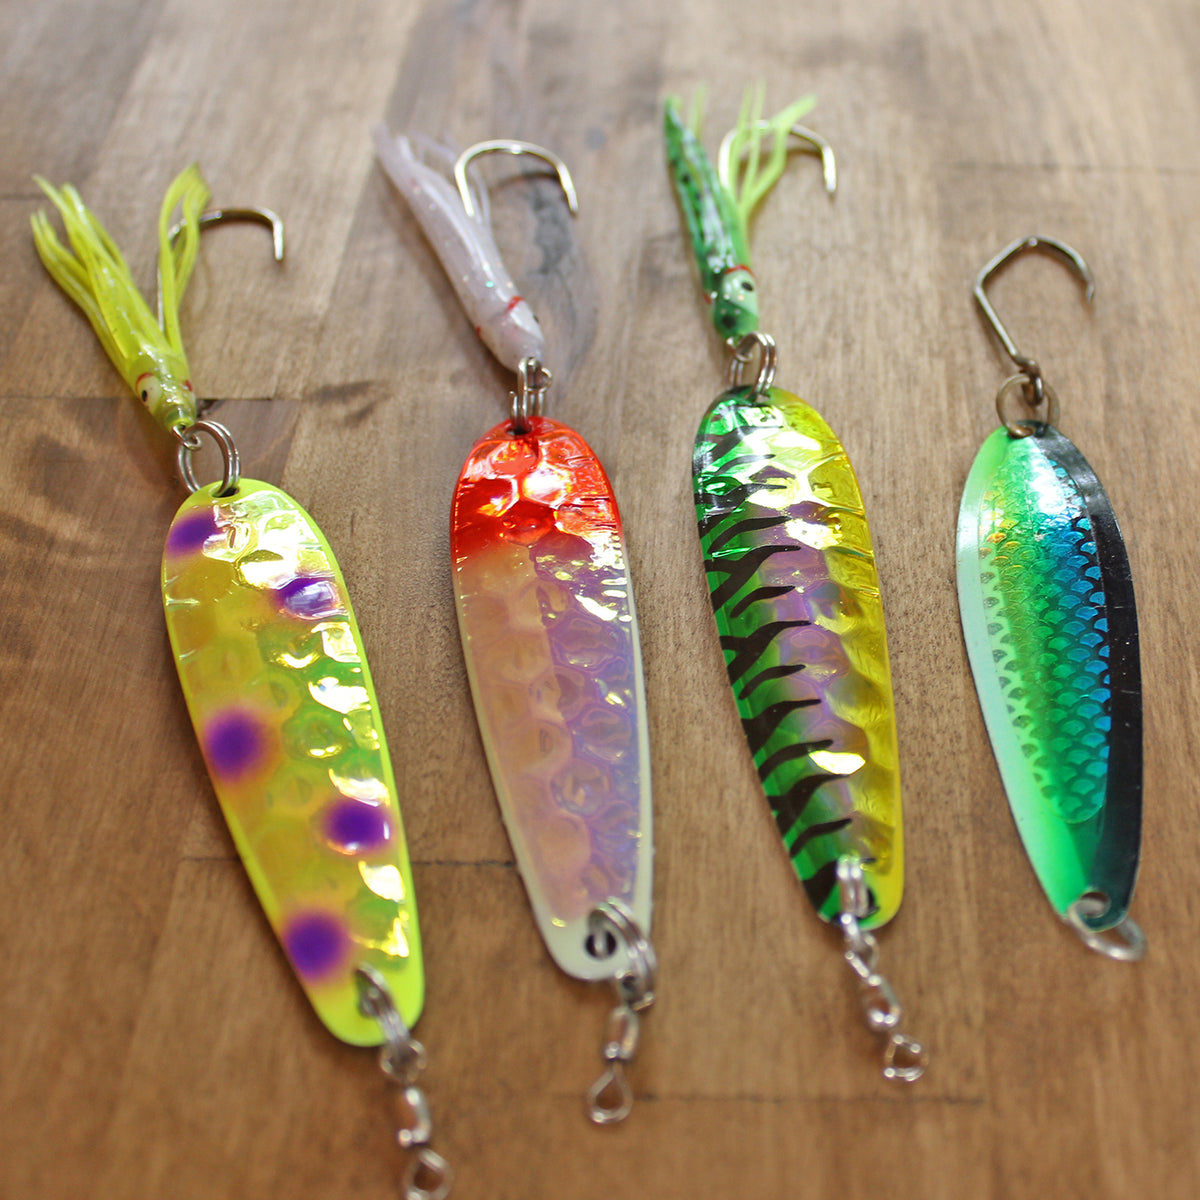 Saltwater Salmon Spoons– Seattle Fishing Company